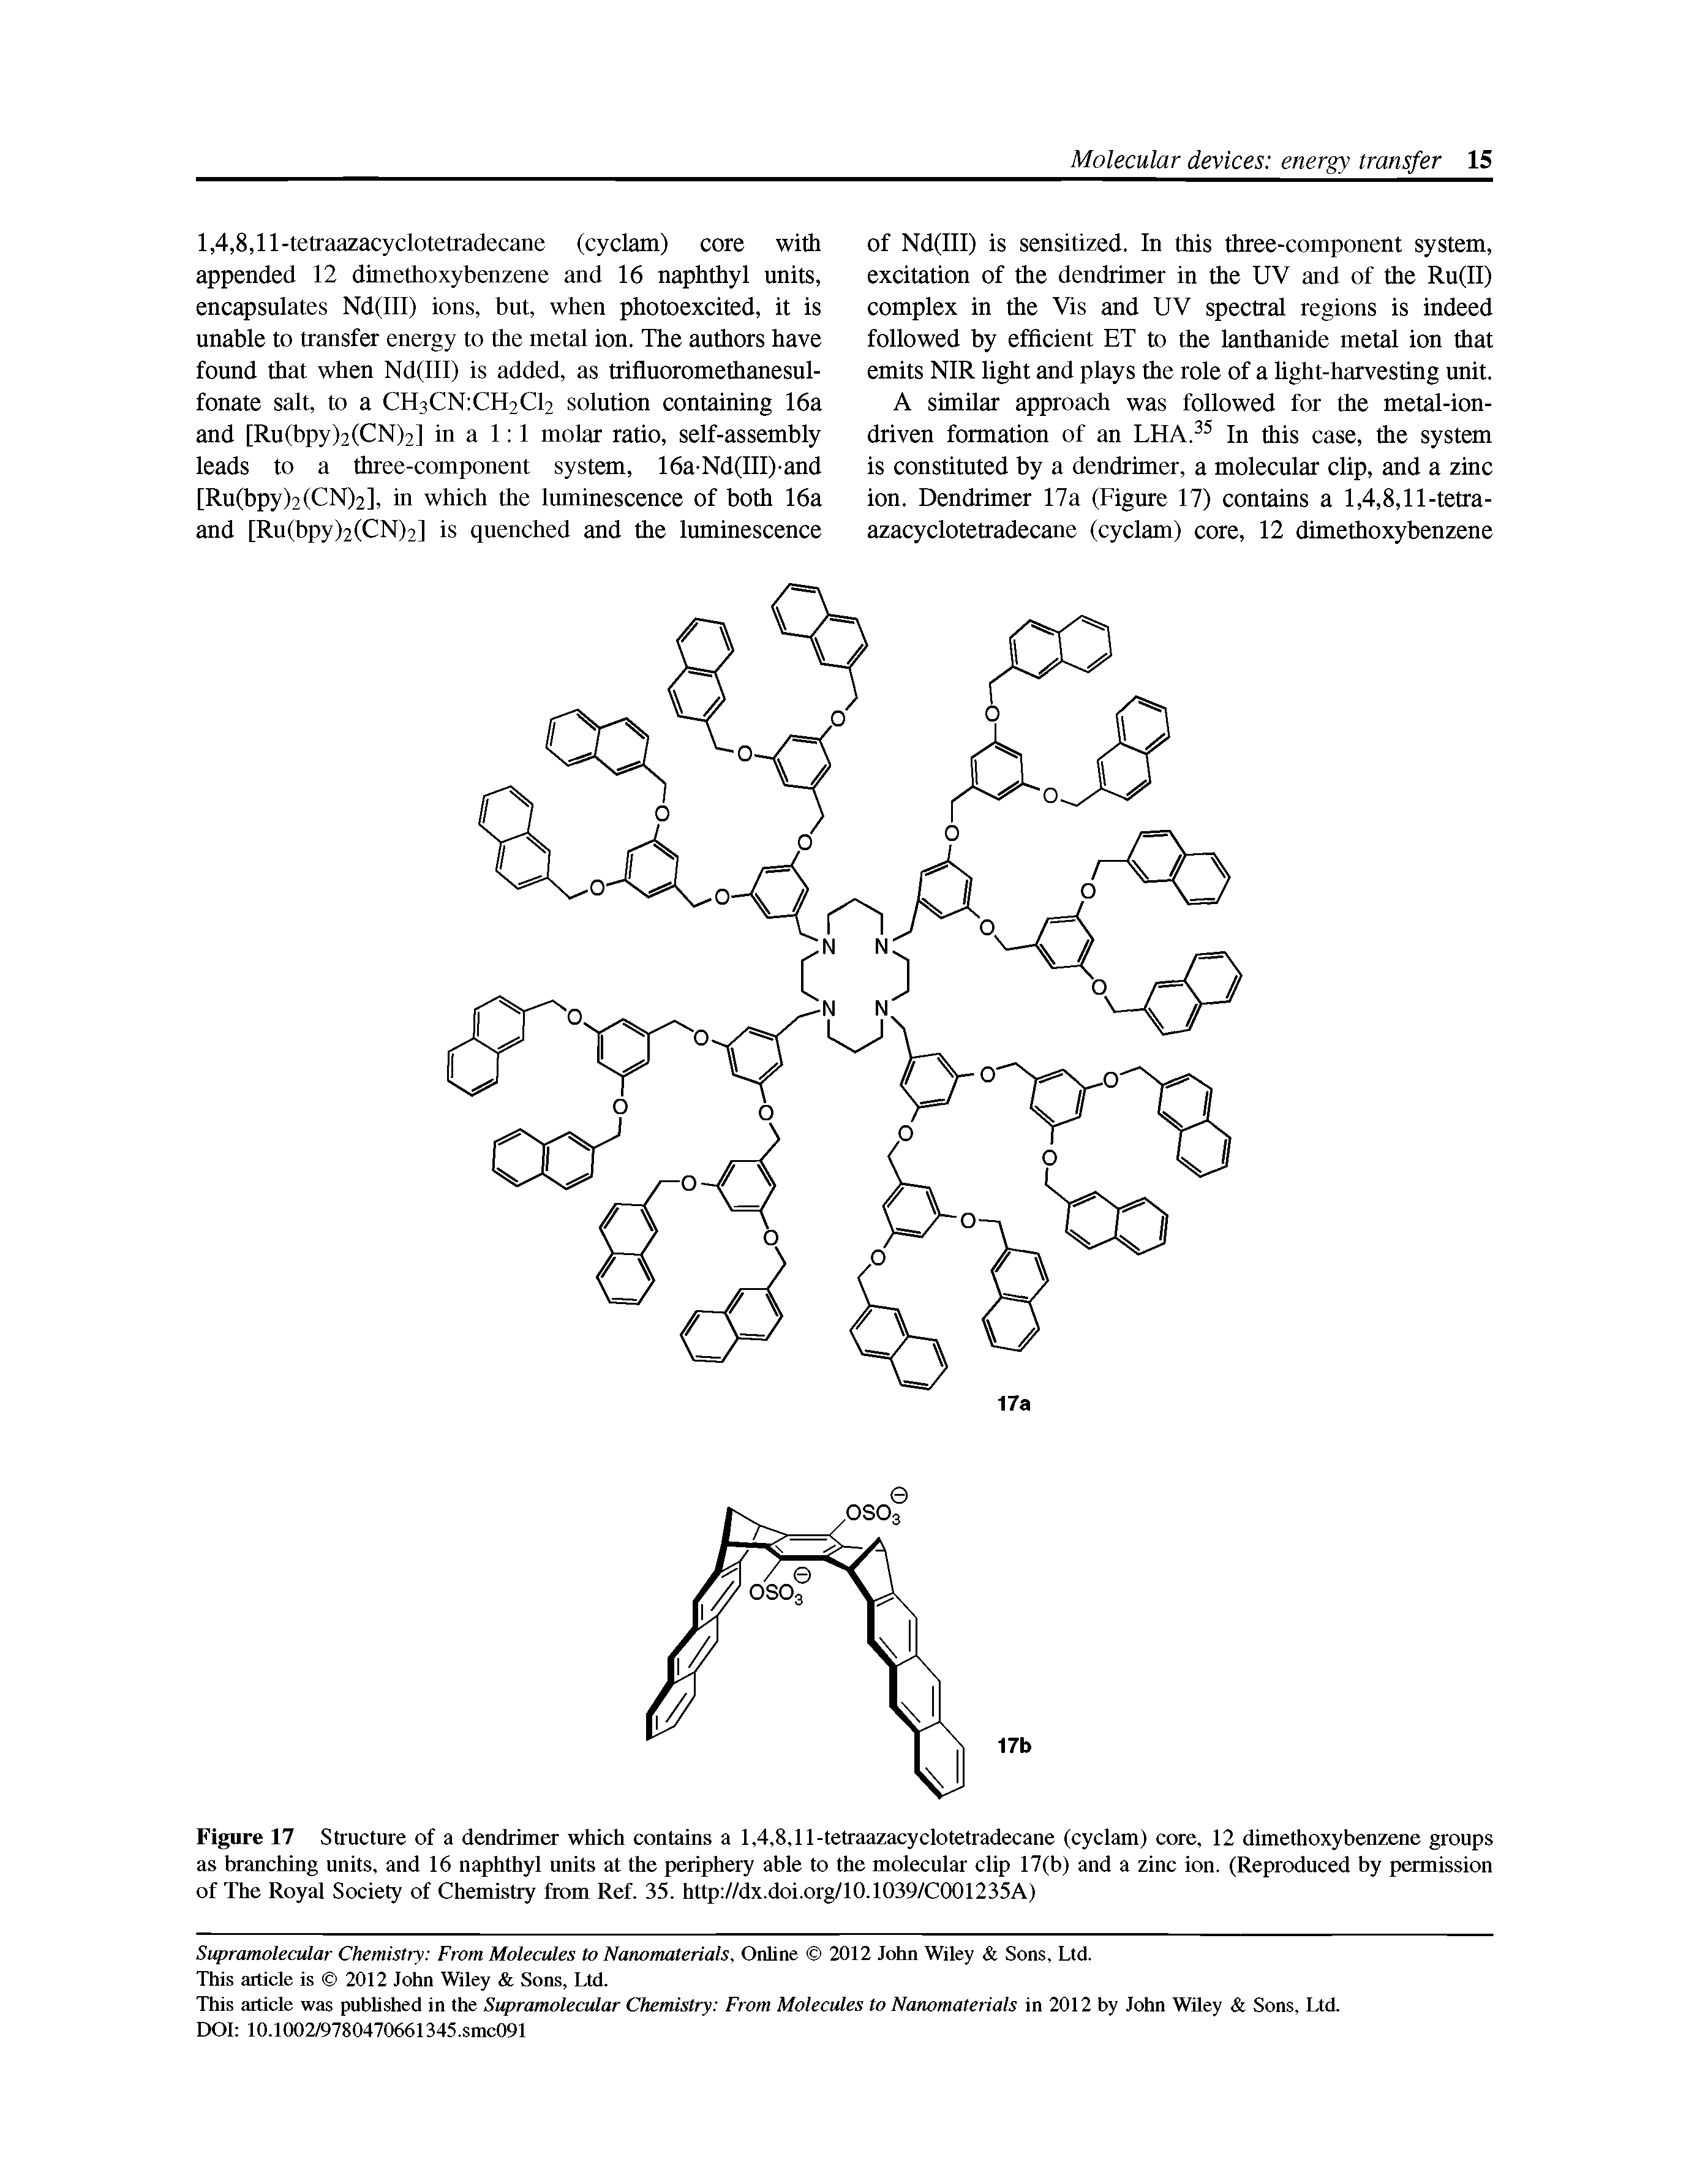 Figure 17 Structure of a dendrimer which contains a 1,4,8,11-tetraazacyclotetradecane (cyclam) core, 12 dimethoxybenzene groups as branching nnits, and 16 naphthyl nnits at the periphery able to the molecular clip 17(b) and a zinc ion. (Reproduced by permission of The Royal Society of Chemistry from Ref. 35. http //dx.doi.org/10.1039/C001235A)...